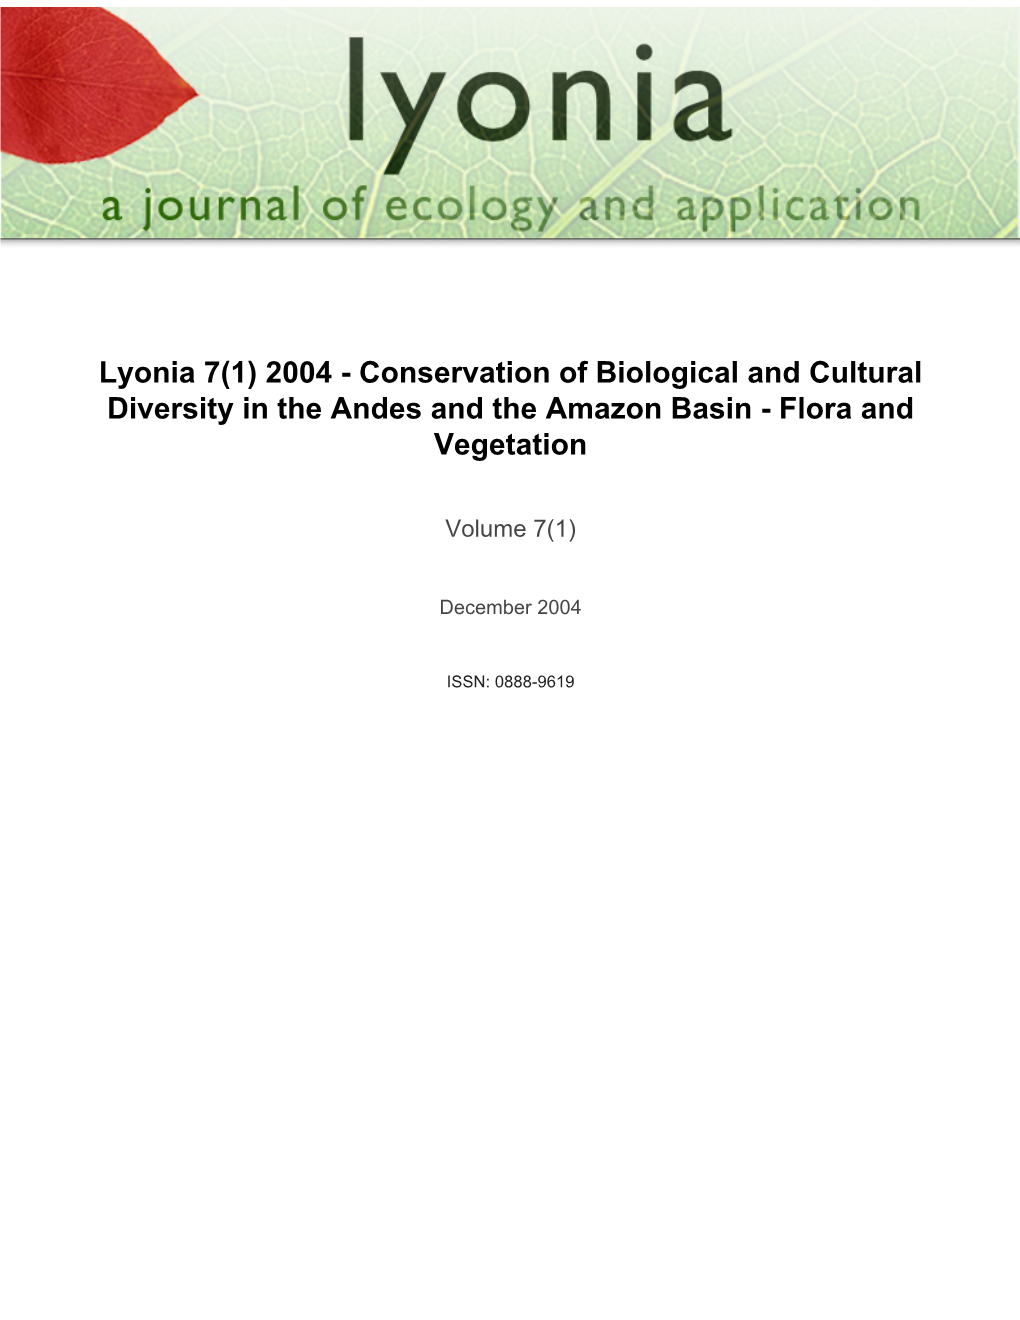 Lyonia 7(1) 2004 - Conservation of Biological and Cultural Diversity in the Andes and the Amazon Basin - Flora and Vegetation